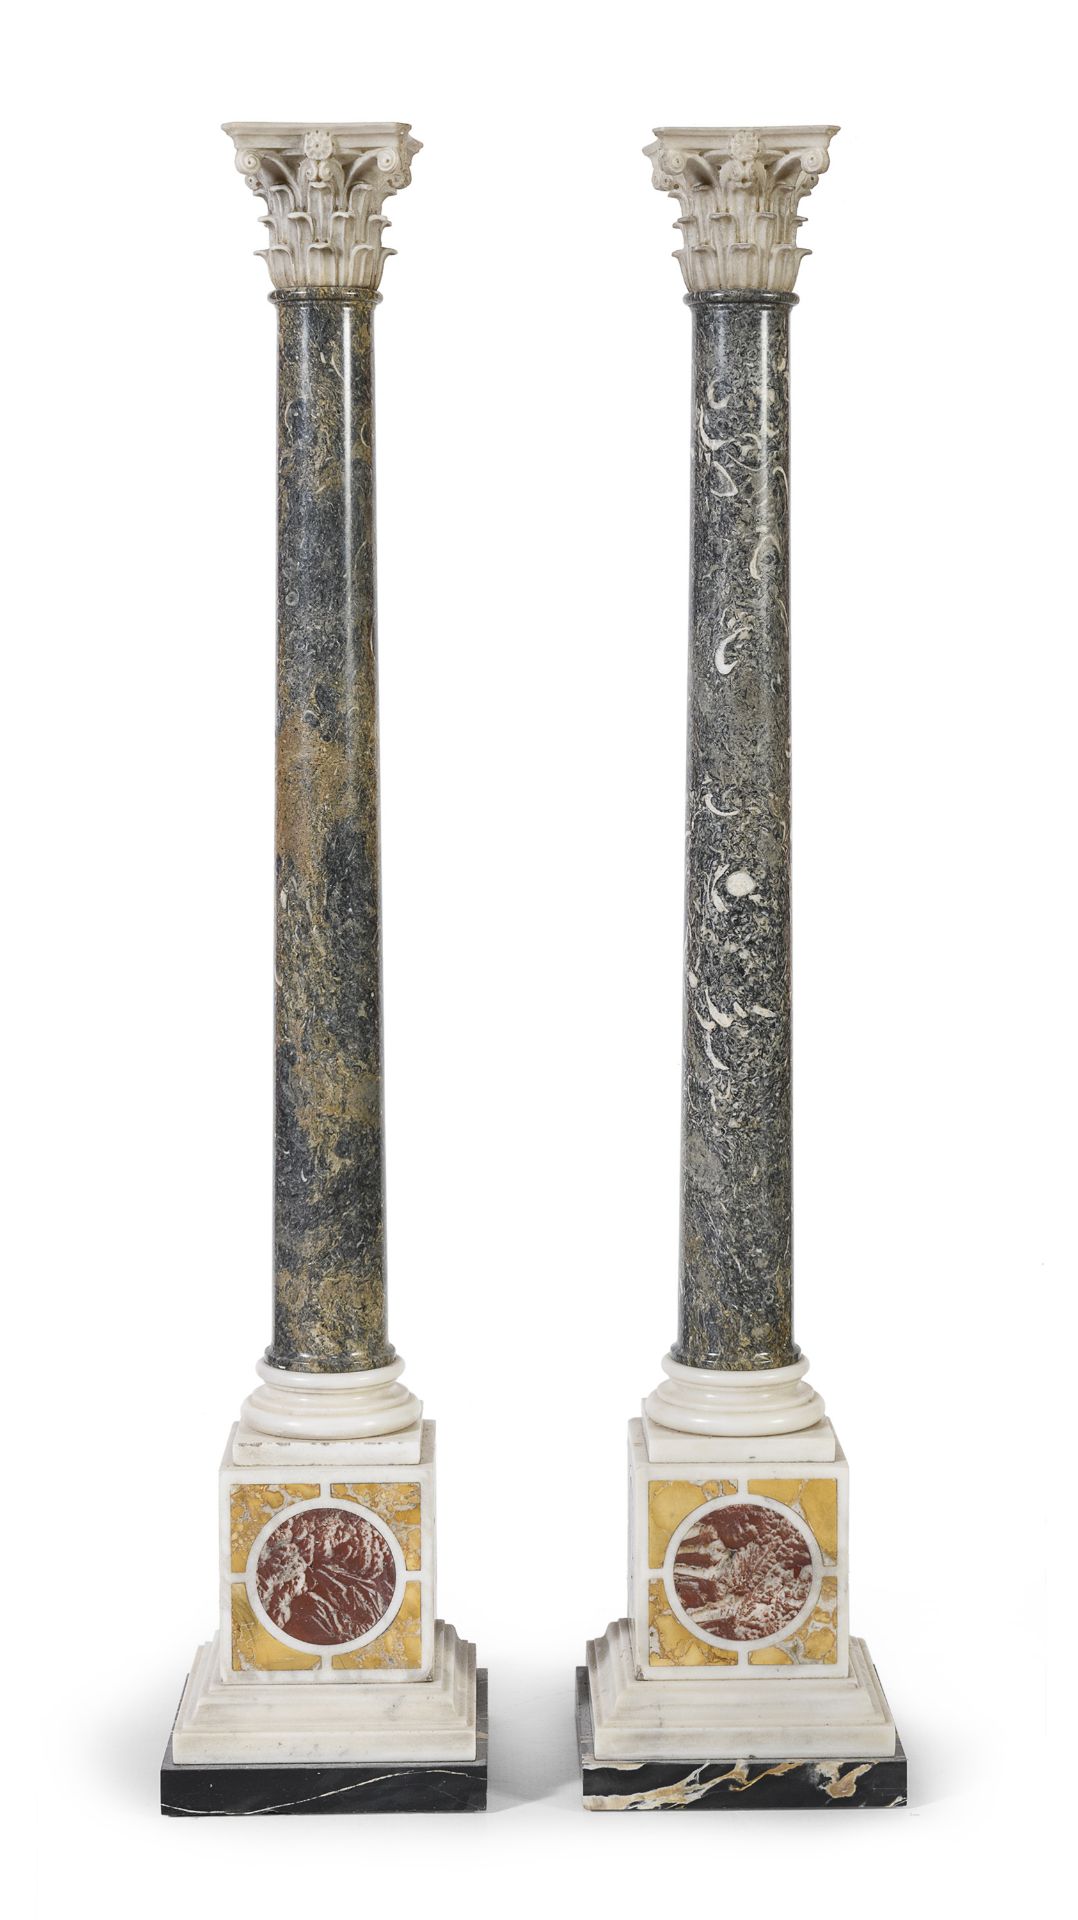 PAIR OF MODELS OF MARBLE COLUMNS 19TH CENTURY